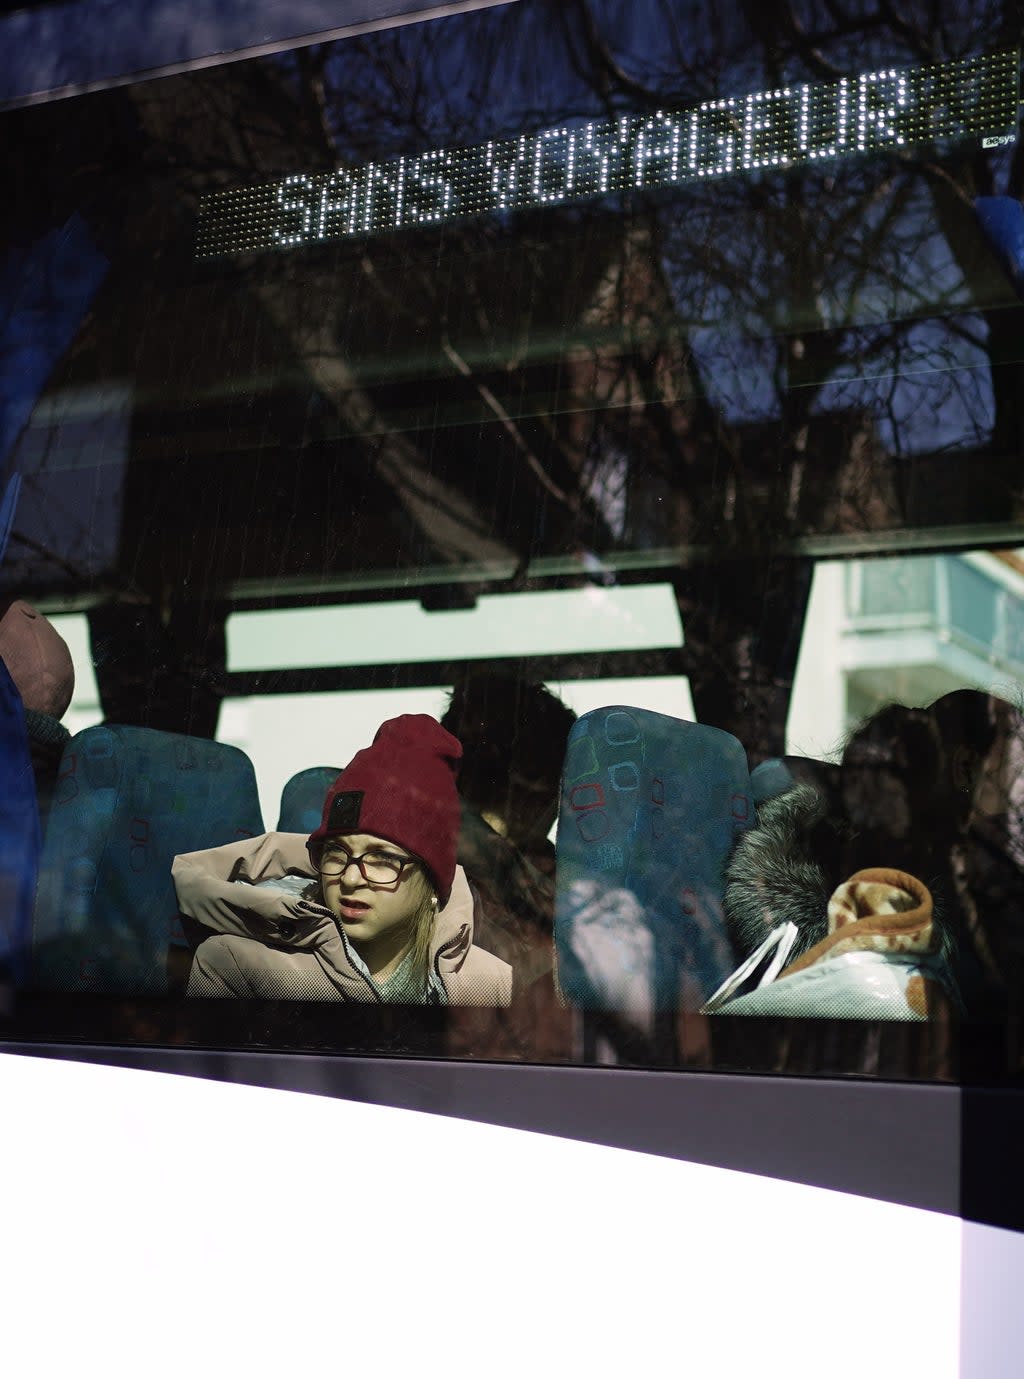 Ukrainian refugees sit on board a bus before it departs Calais (Aaron Chown/PA) (PA Wire)